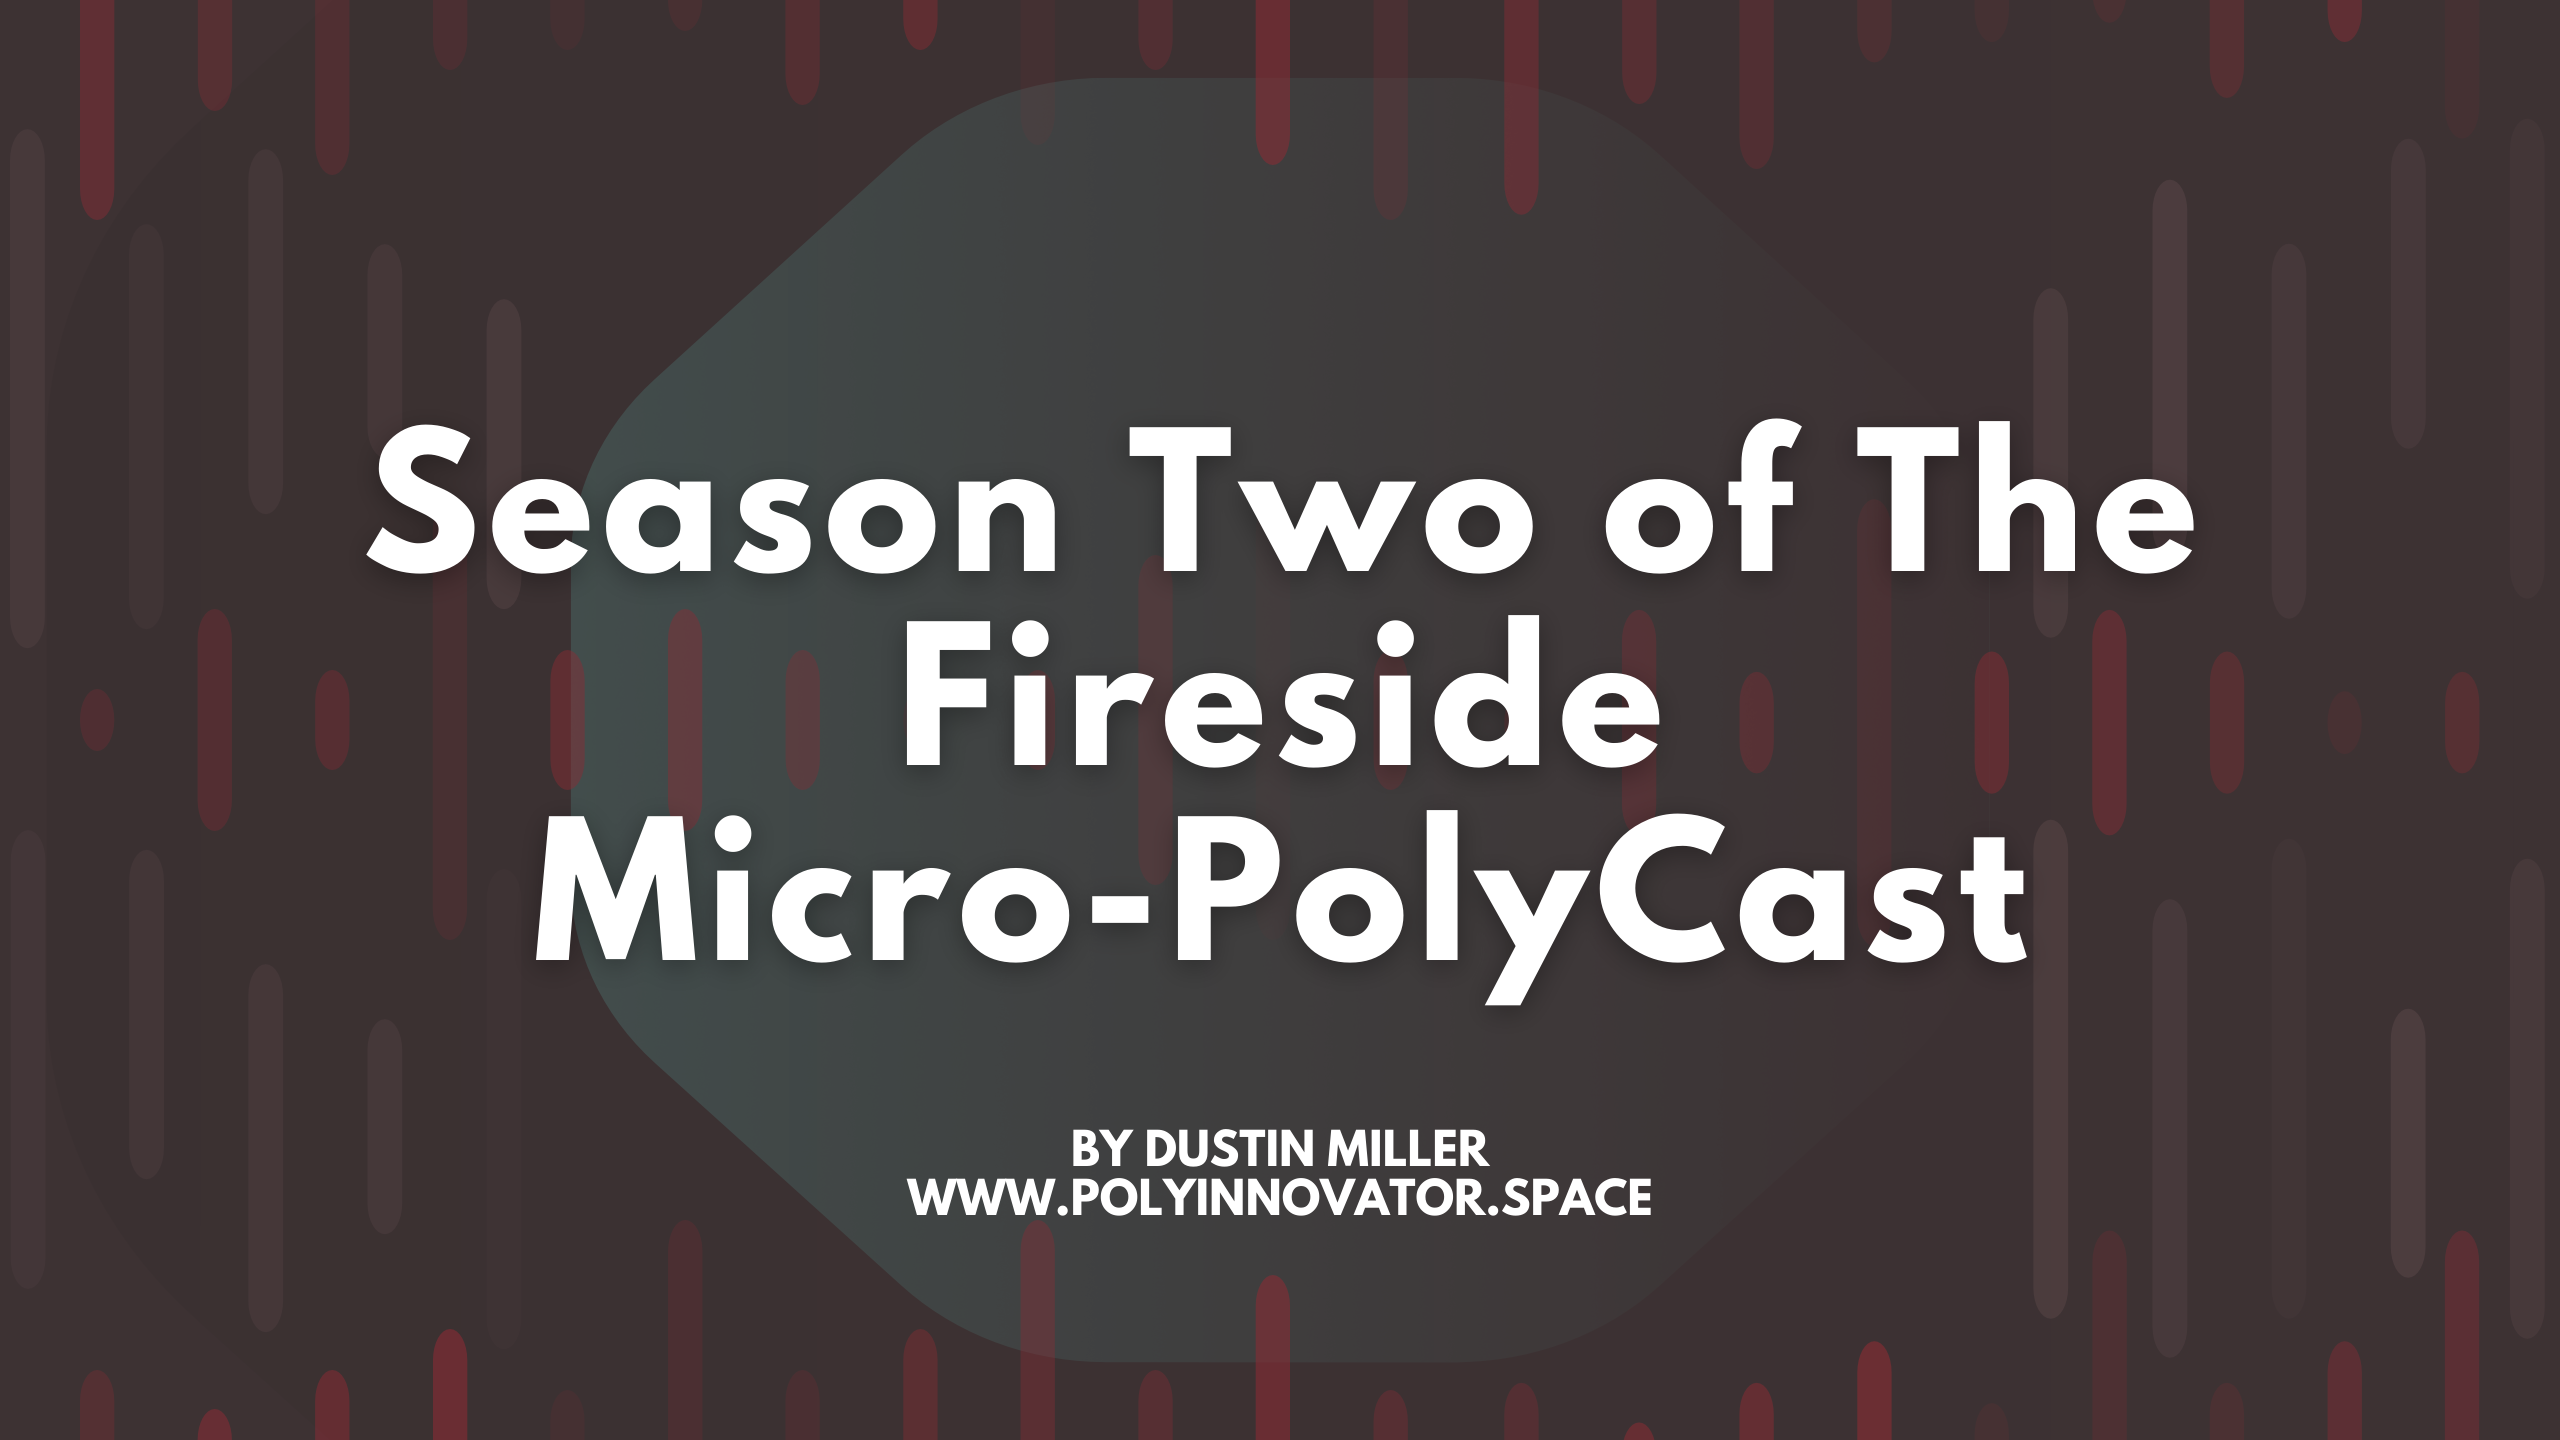 Season Two of The Fireside Micro-PolyCast